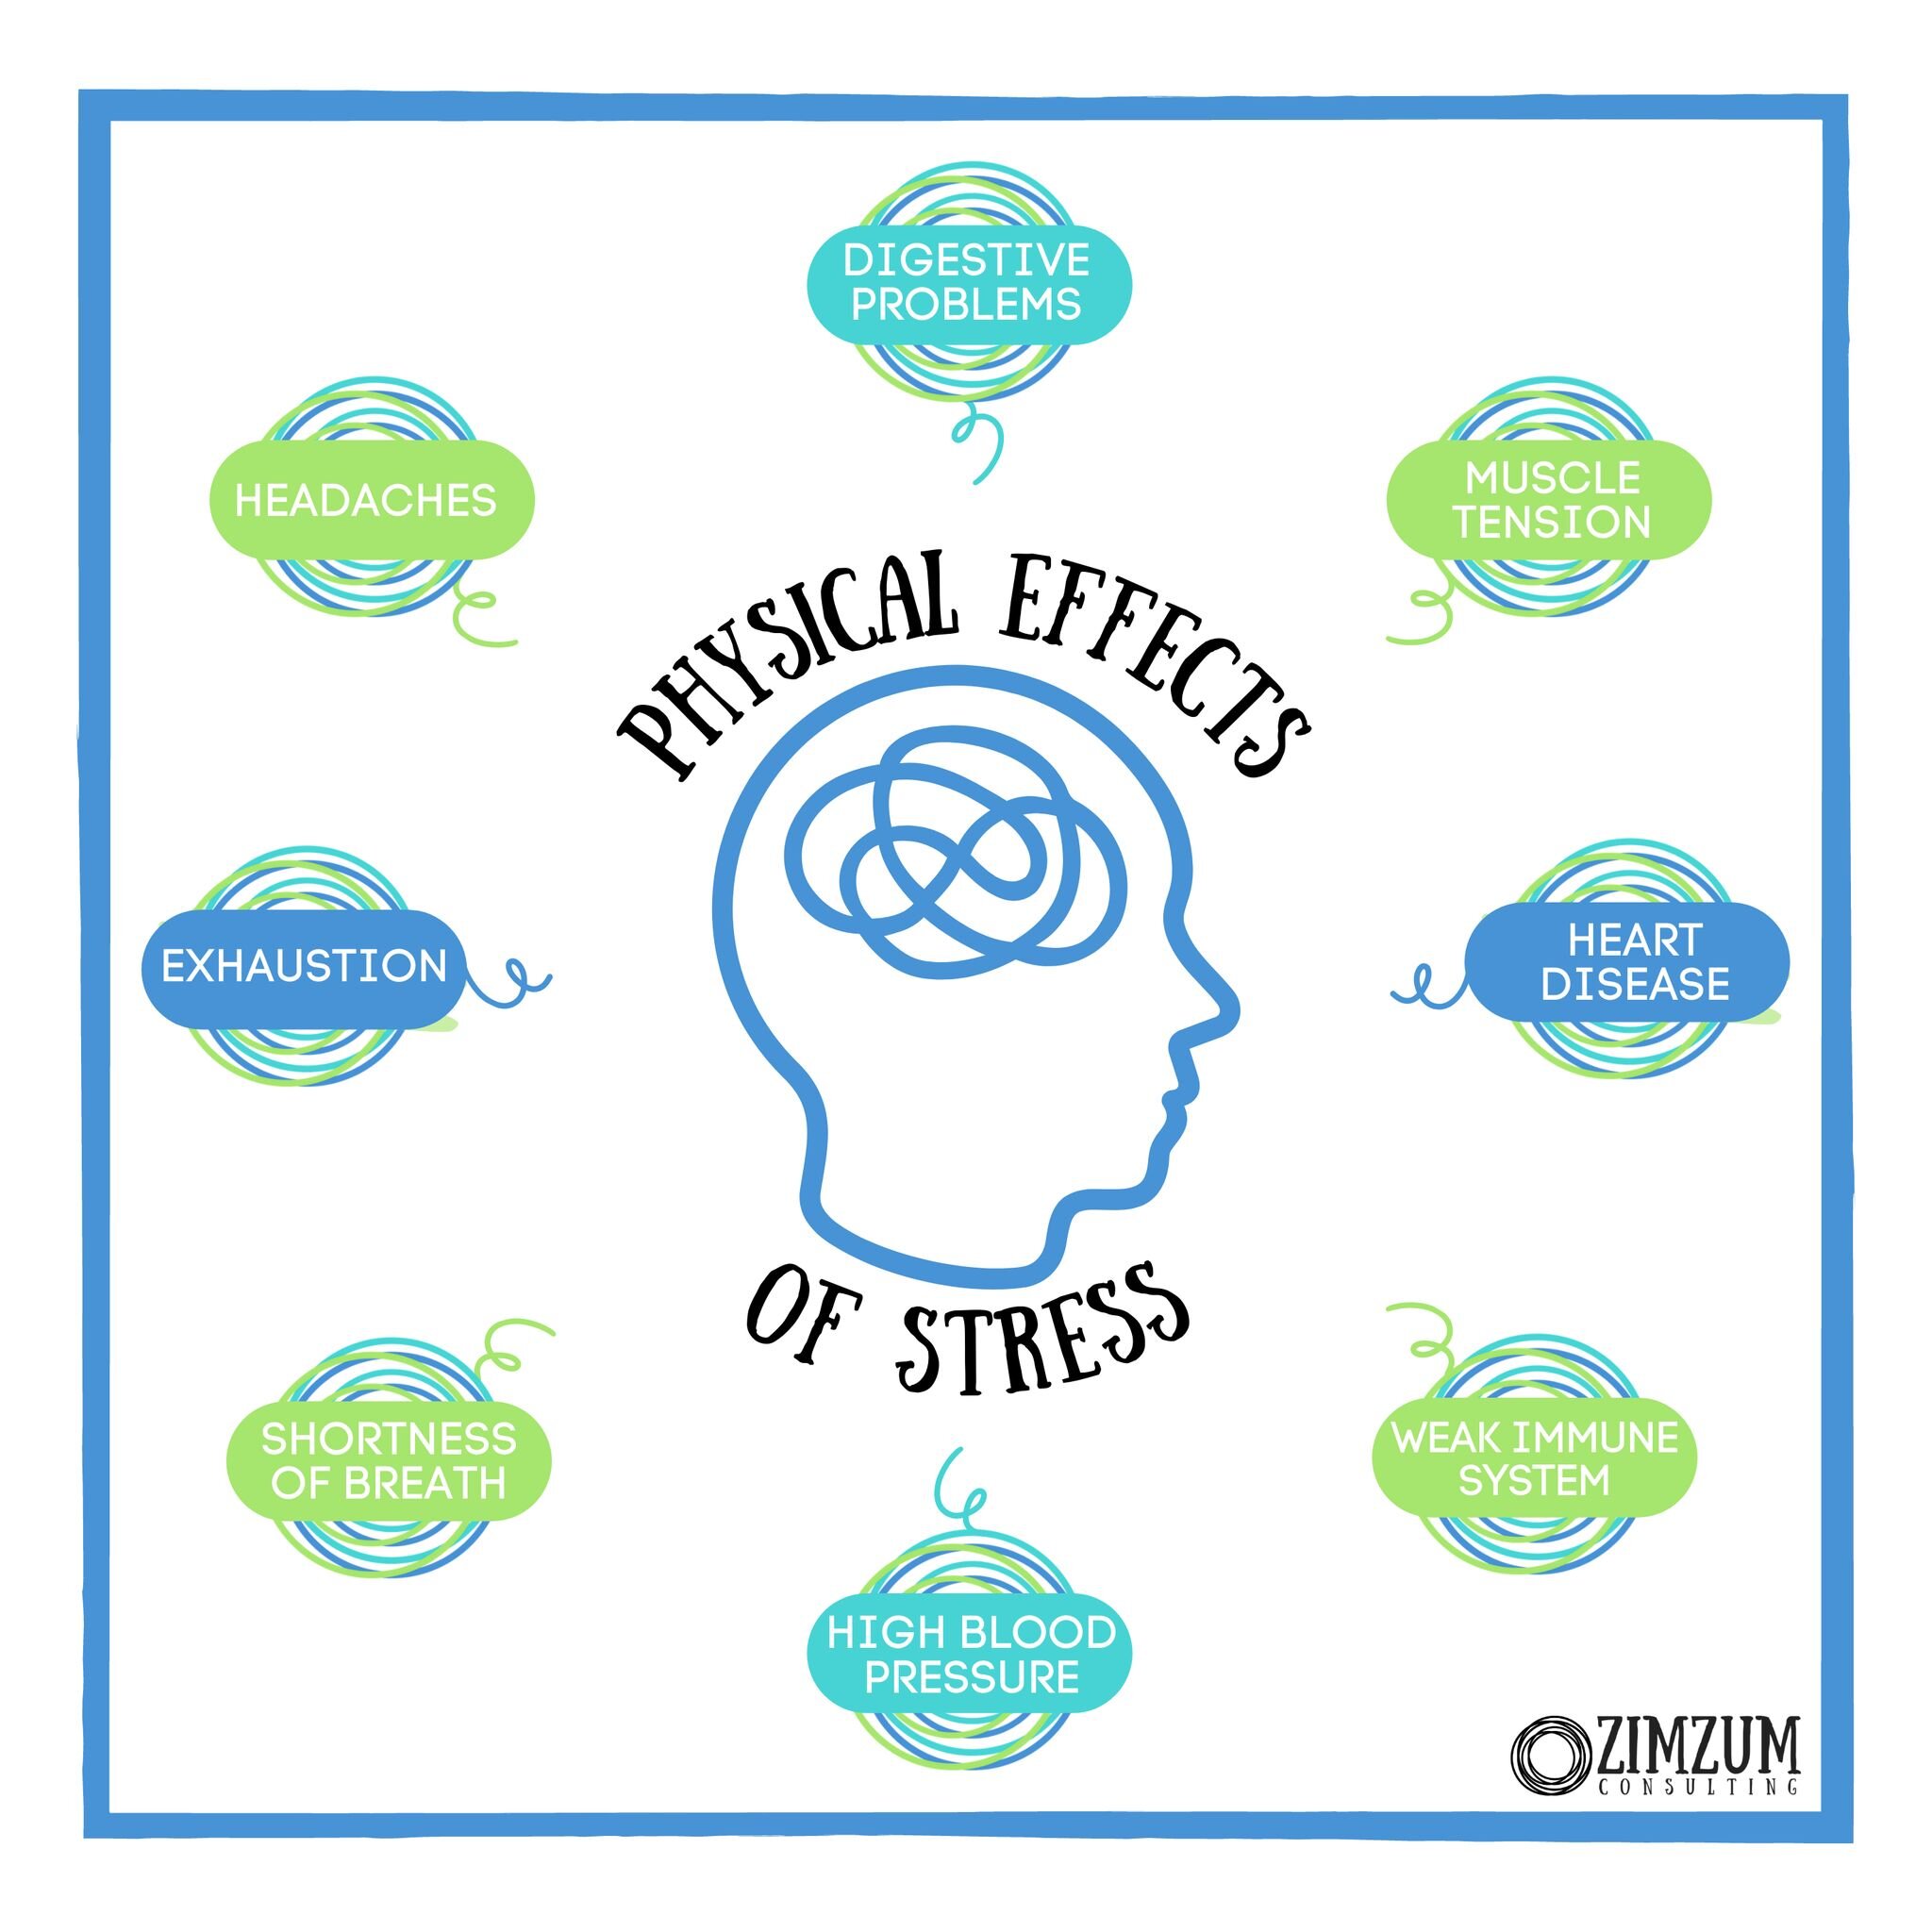 Stress is a silent enemy that can wreak havoc on both your body and mind. 
✨
From headaches and muscle tension to anxiety and depression, it's time to take control of your physical and emotional wellbeing. Take a deep breath, go for a walk, or chat w